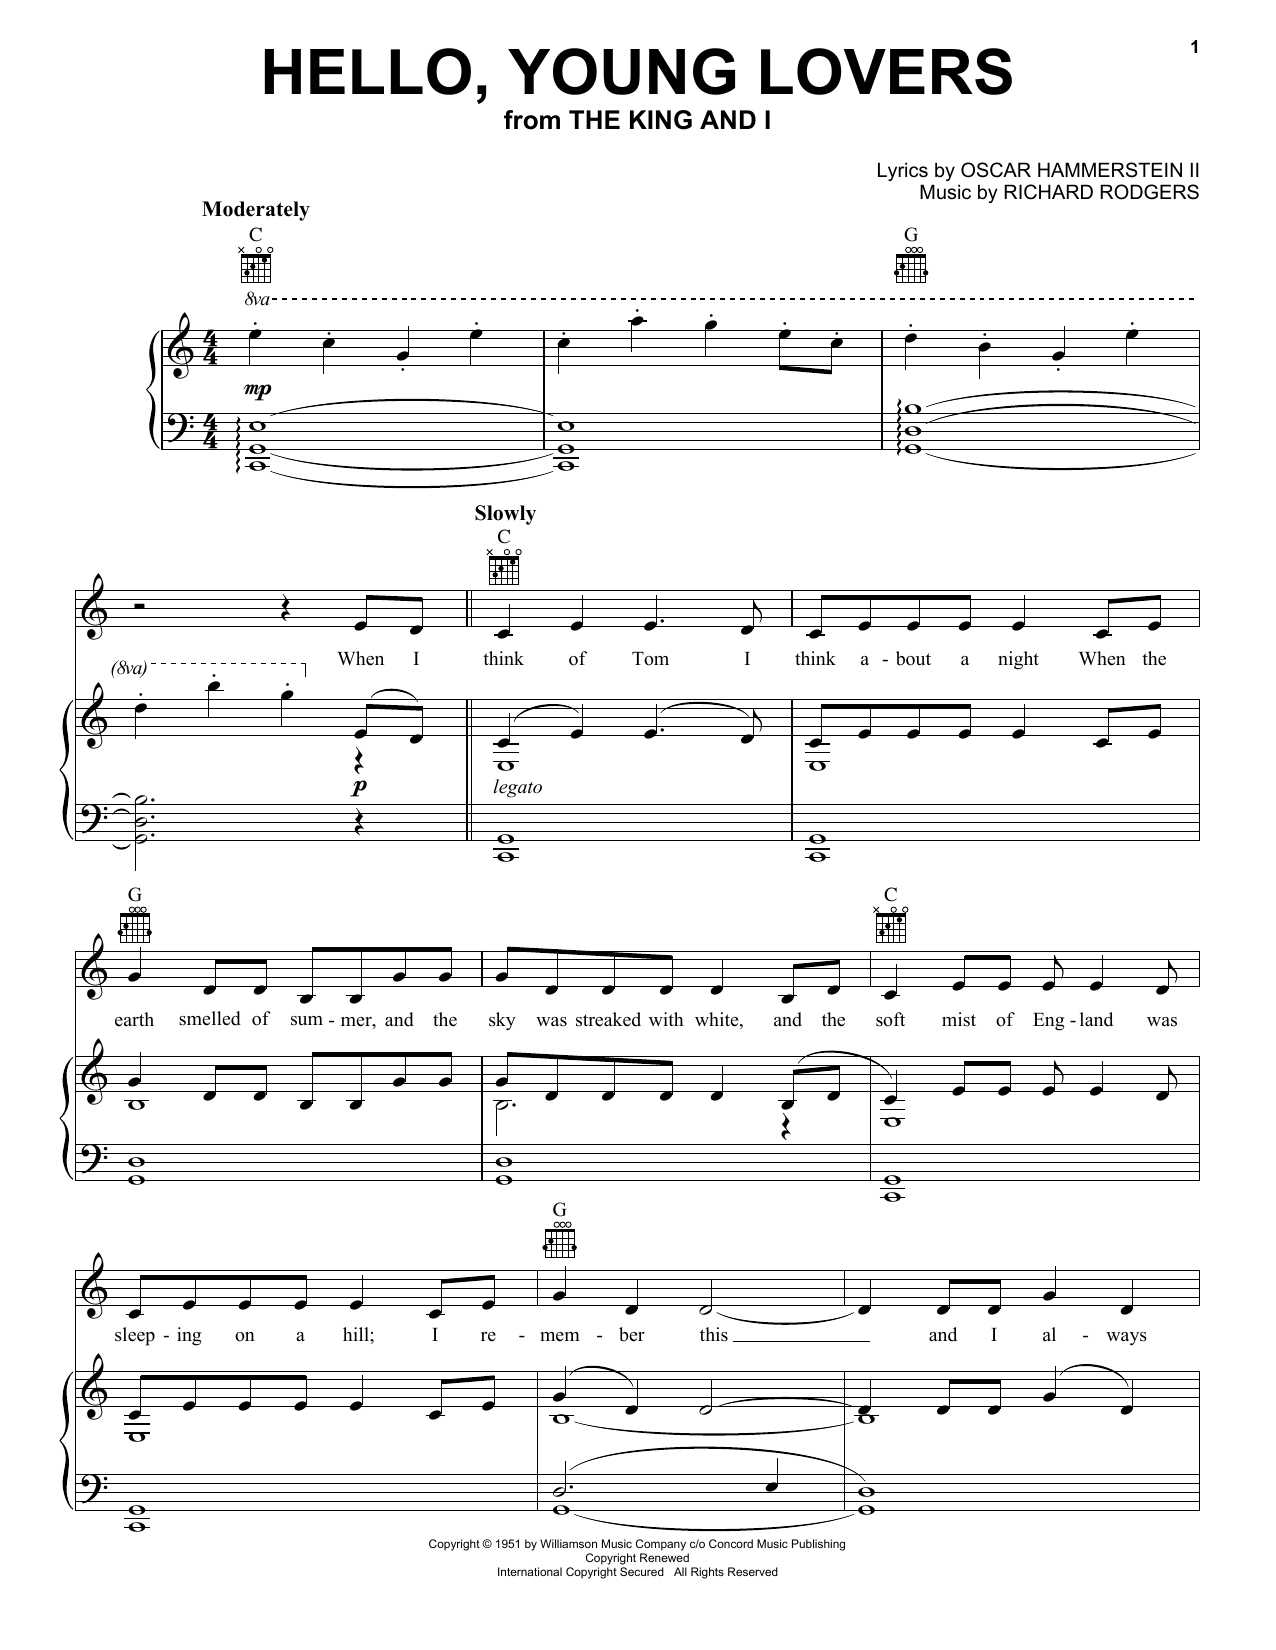 Rodgers & Hammerstein Hello, Young Lovers sheet music notes printable PDF score